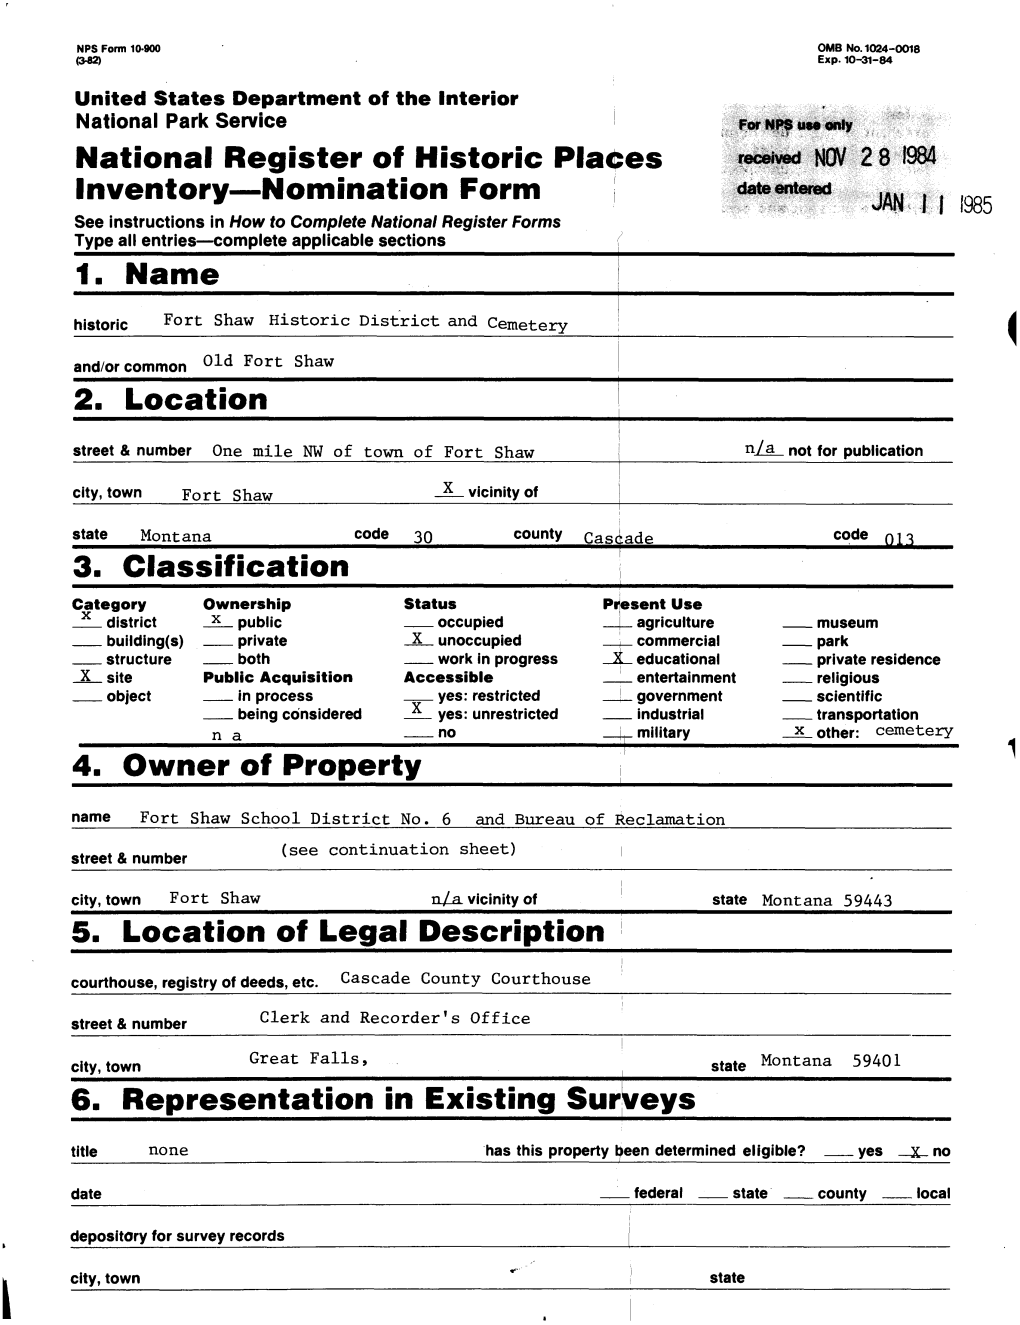 National Register of Historic Places Inventory—Nomination Form 1. Name 2. Location 3. Classification 4. Owner Off Property 5